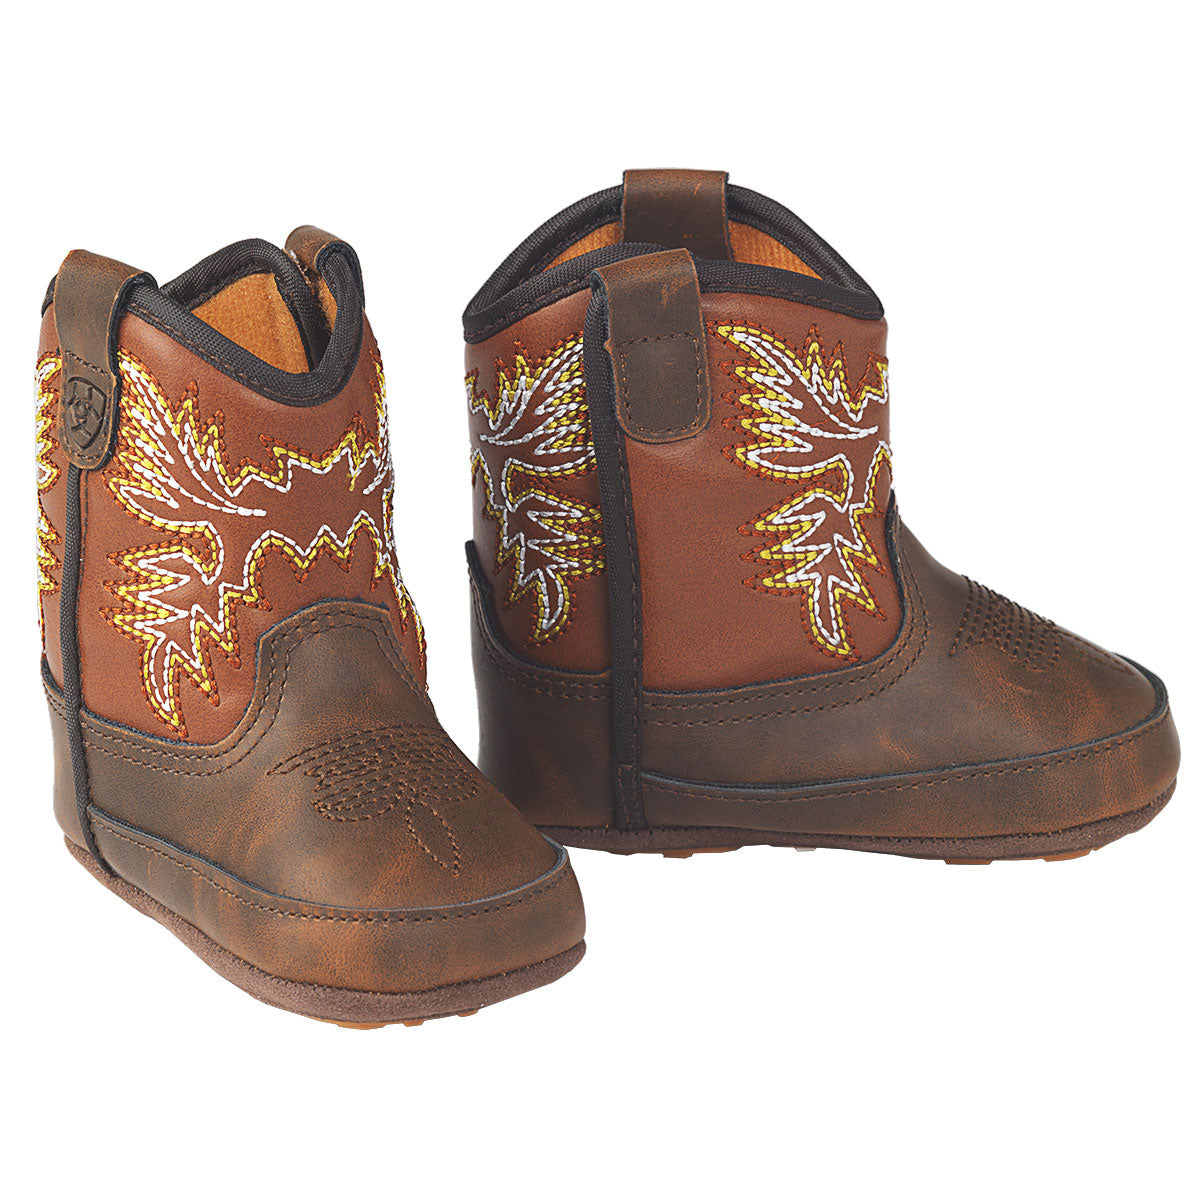 Ariat Lil' Stompers Work Hog Infant Boots